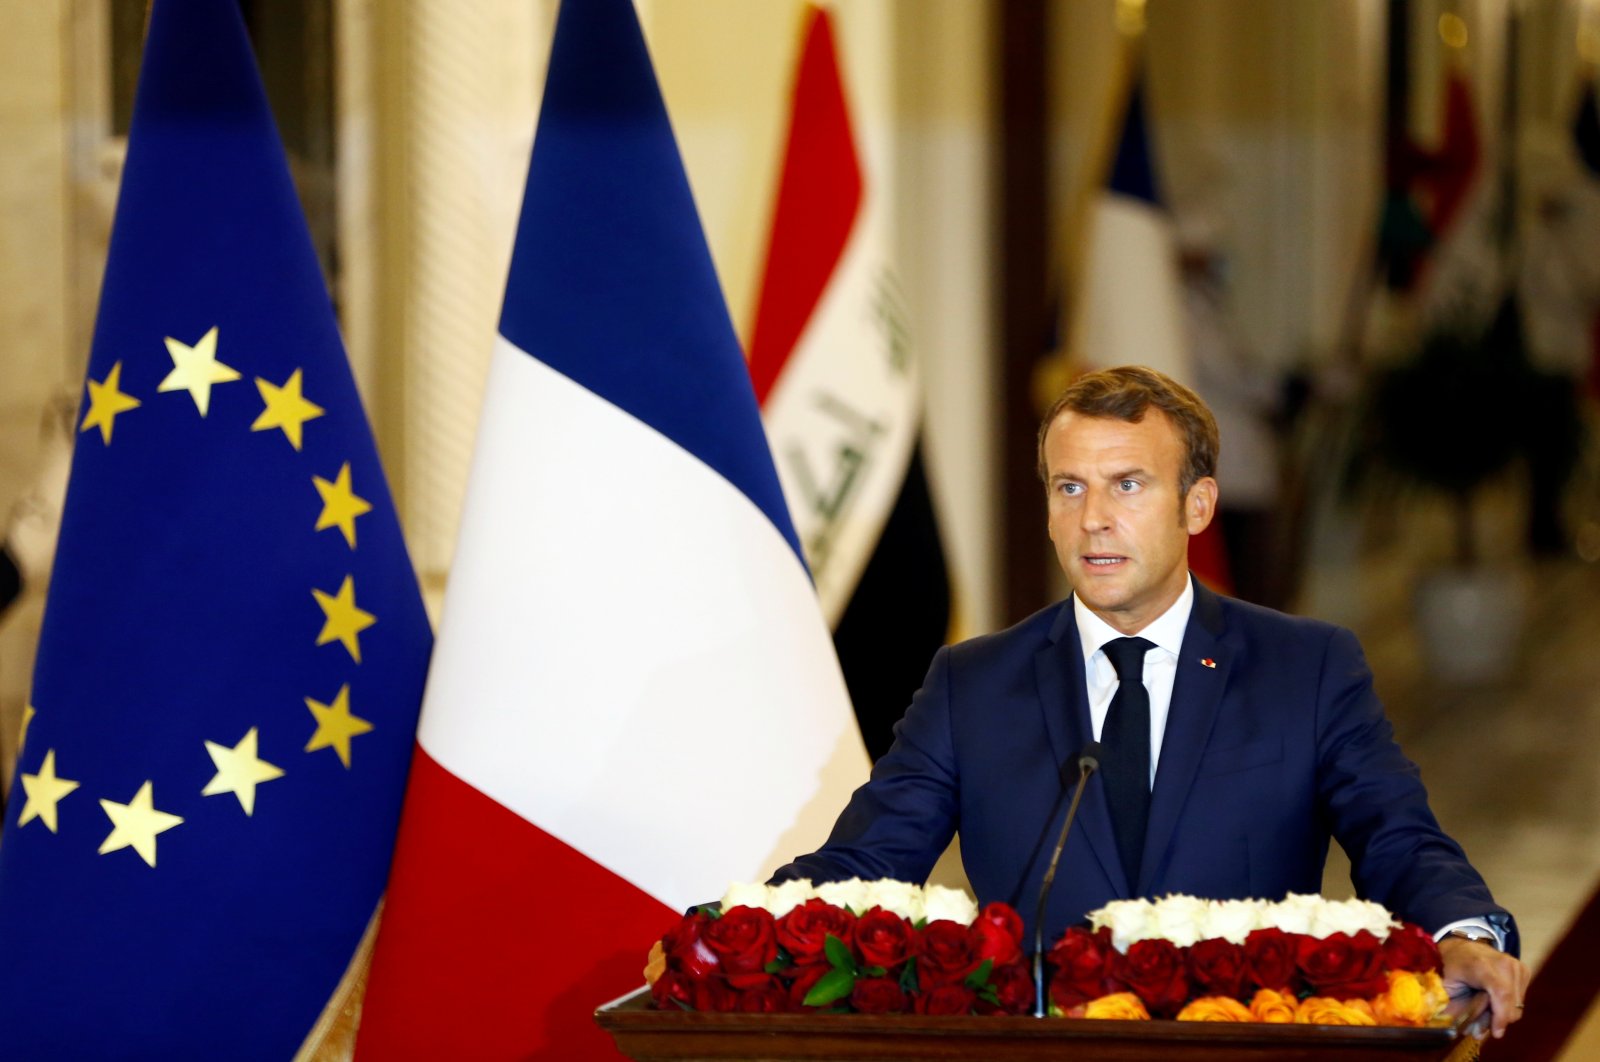 French President Emmanuel Macron speaks during a news conference, in Baghdad, Iraq, Sept. 2, 2020. (Reuters Photo)